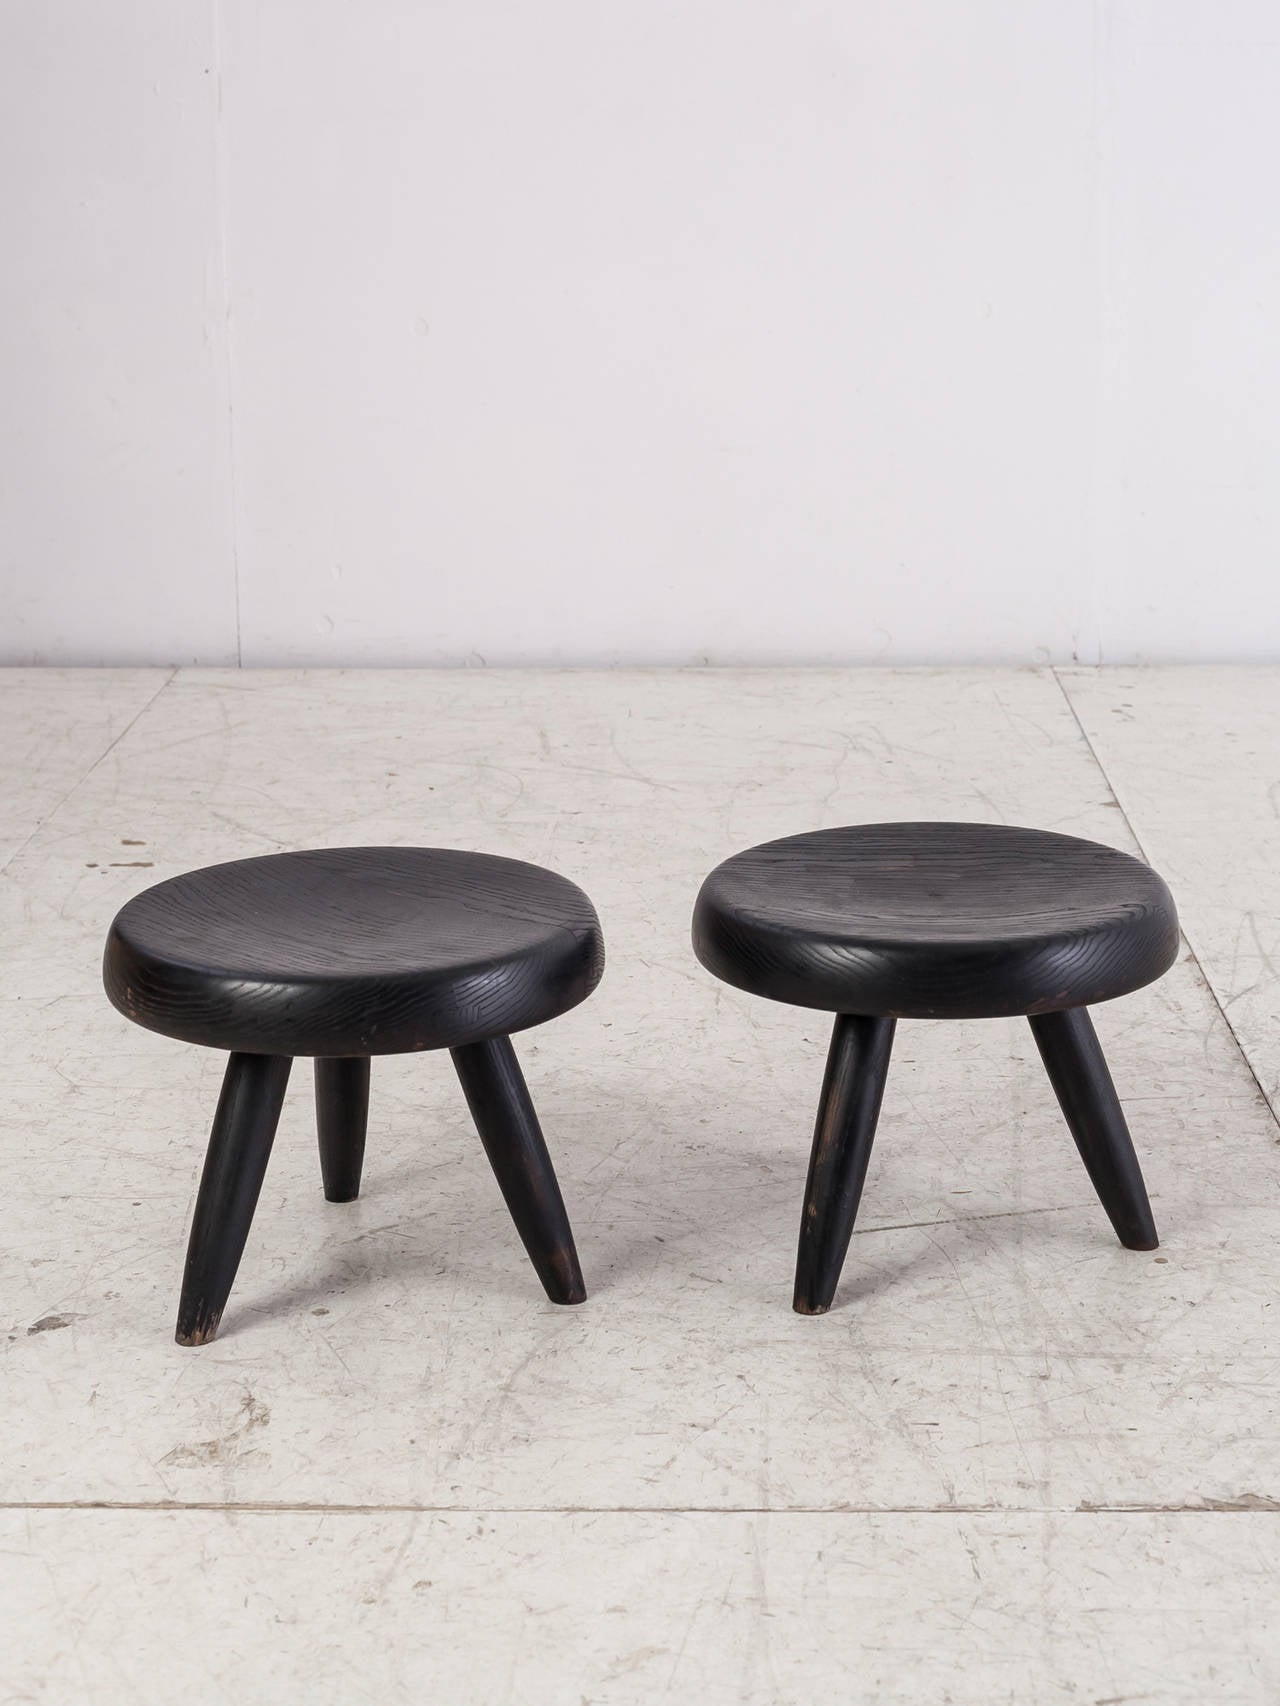 A rare pair of Charlotte Perriand low stools in black ash.
Beautiful mild wear and in an excellent condition.